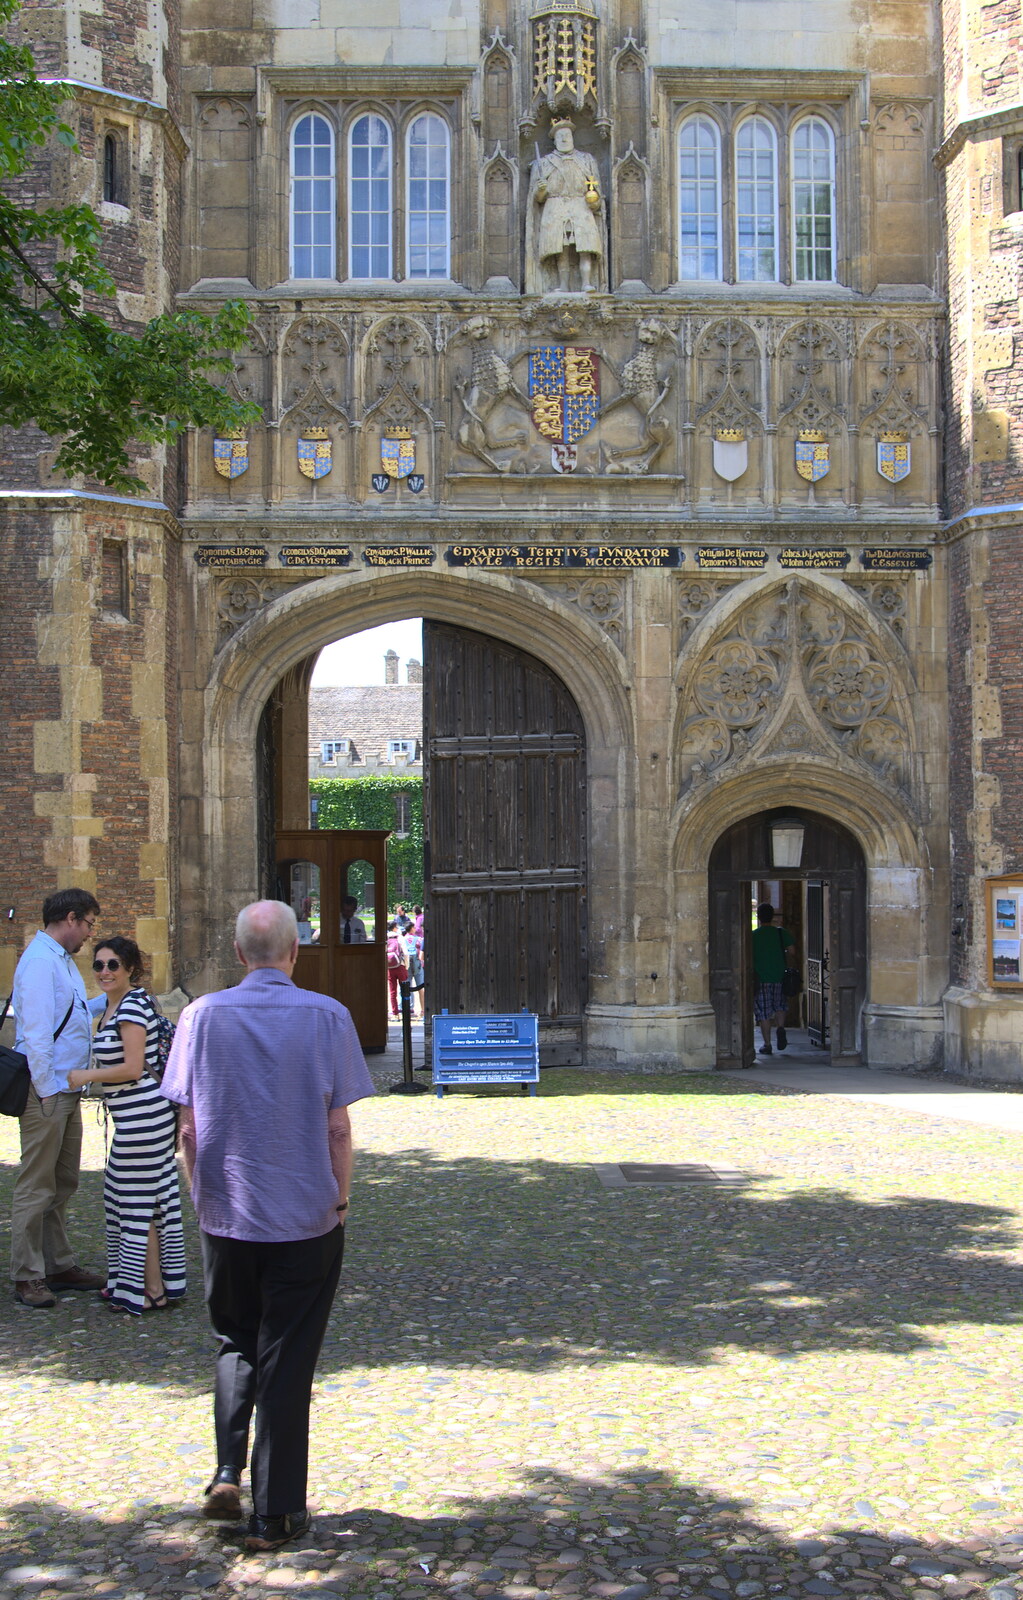 Grandad walks up to Trinity's Great Gate from Punting With Grandad, Cambridge, Cambridgeshire - 6th June 2015